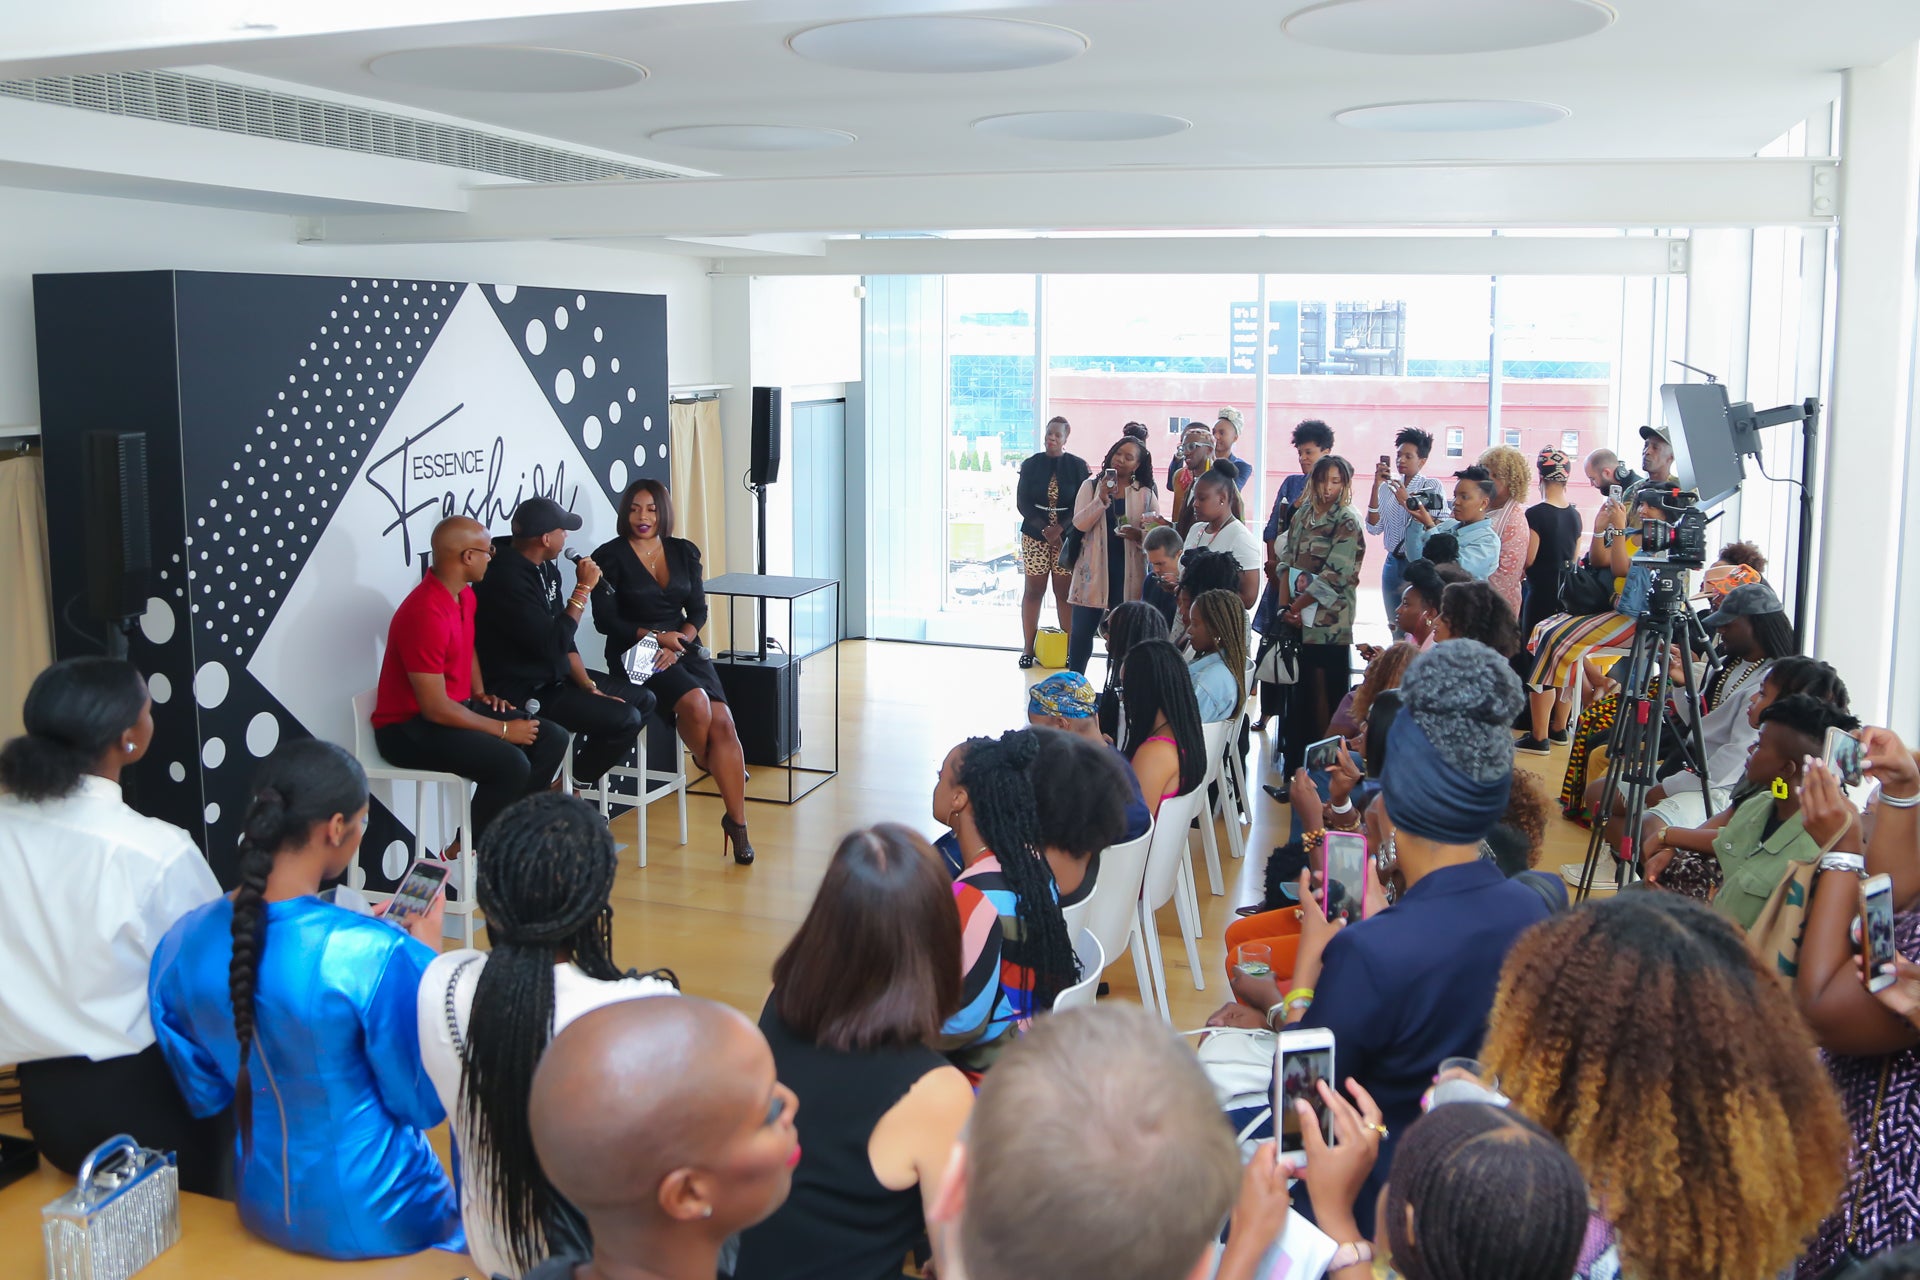 ESSENCE Fashion House NYC: Jason Bolden And Adair Curtis Discuss The Struggles Of Being A Black Entrepreneur